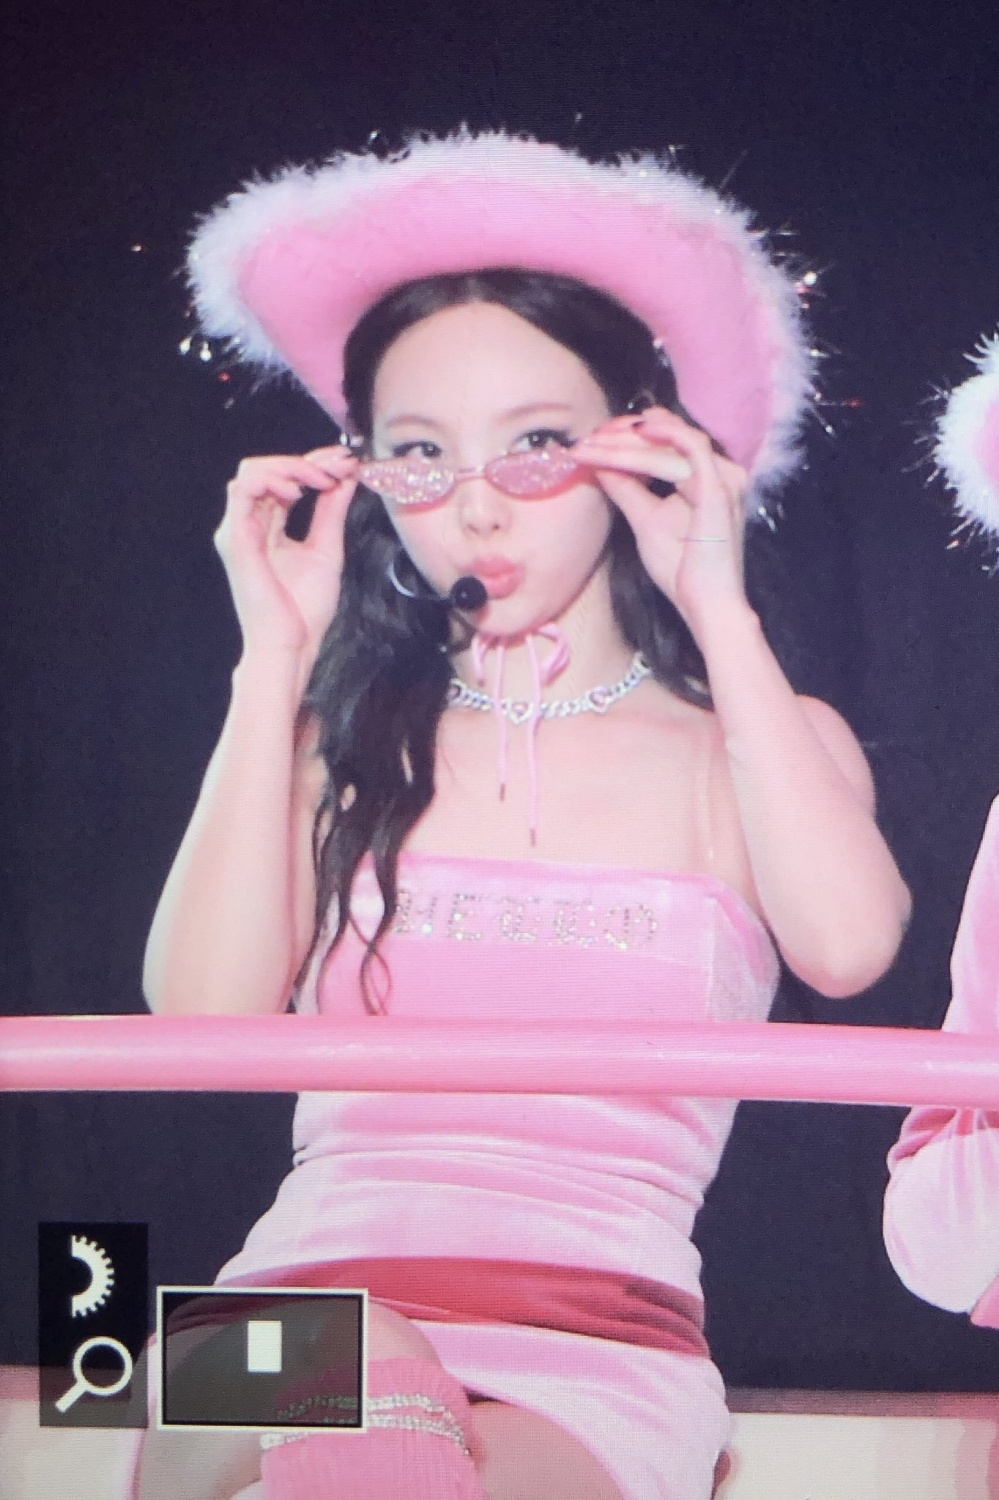 Twice Concert Outfits inspired nayeon pop｜TikTok Search